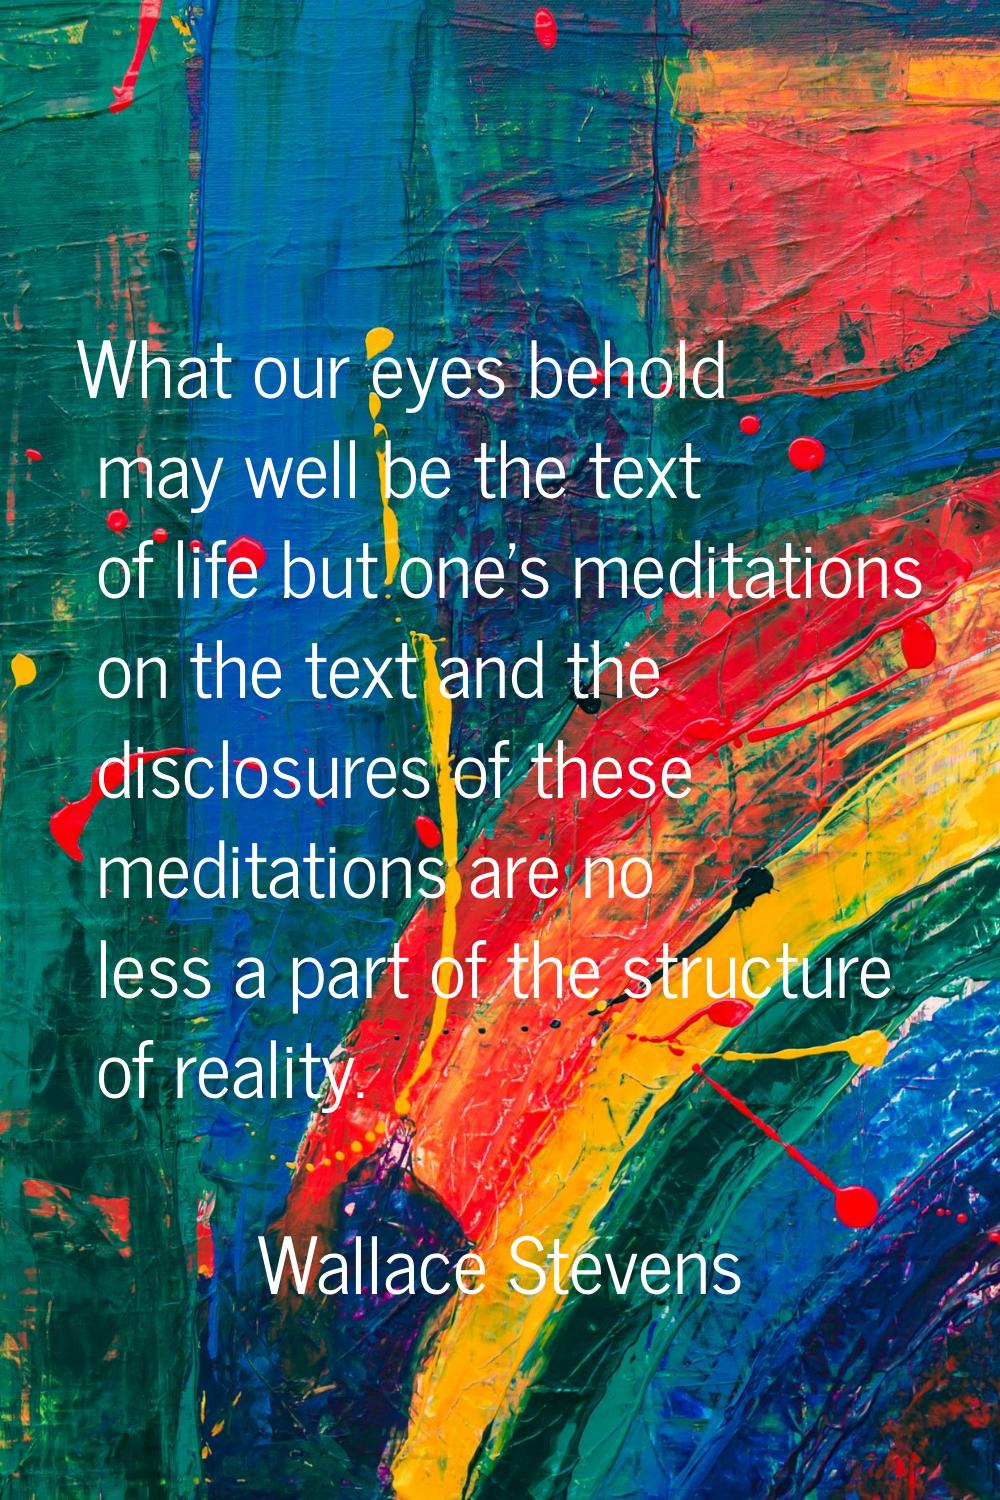 What our eyes behold may well be the text of life but one's meditations on the text and the disclos